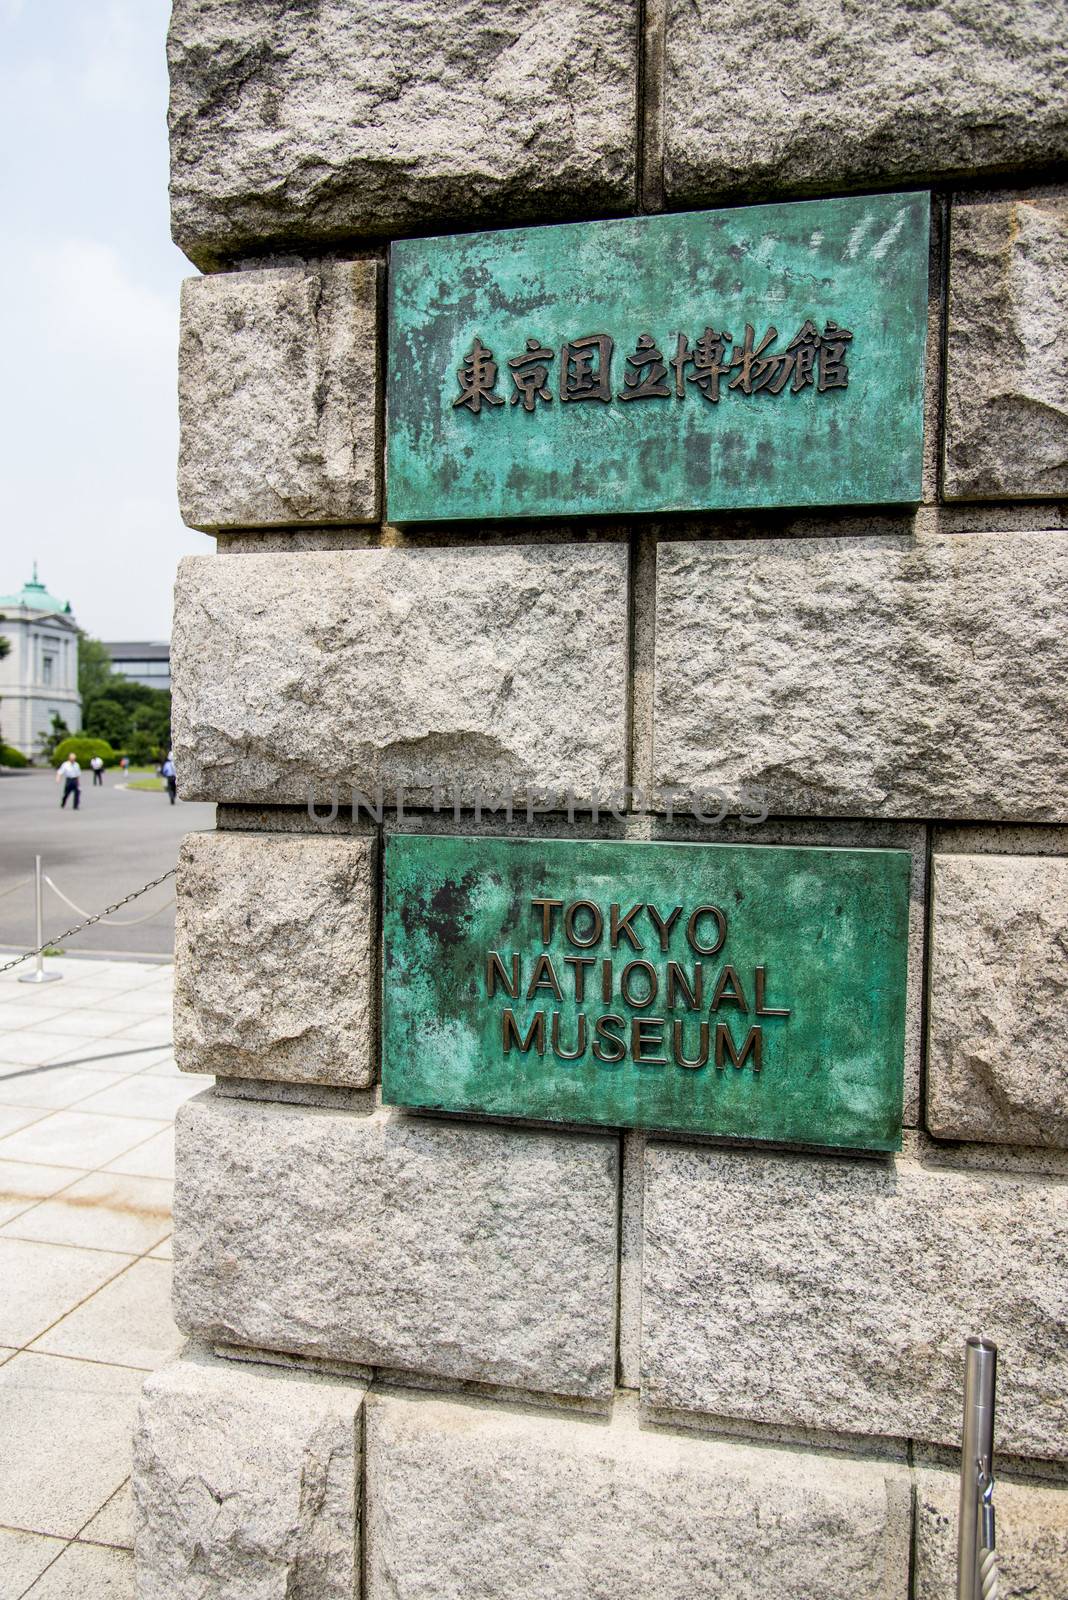 Tokyo National Museum sign